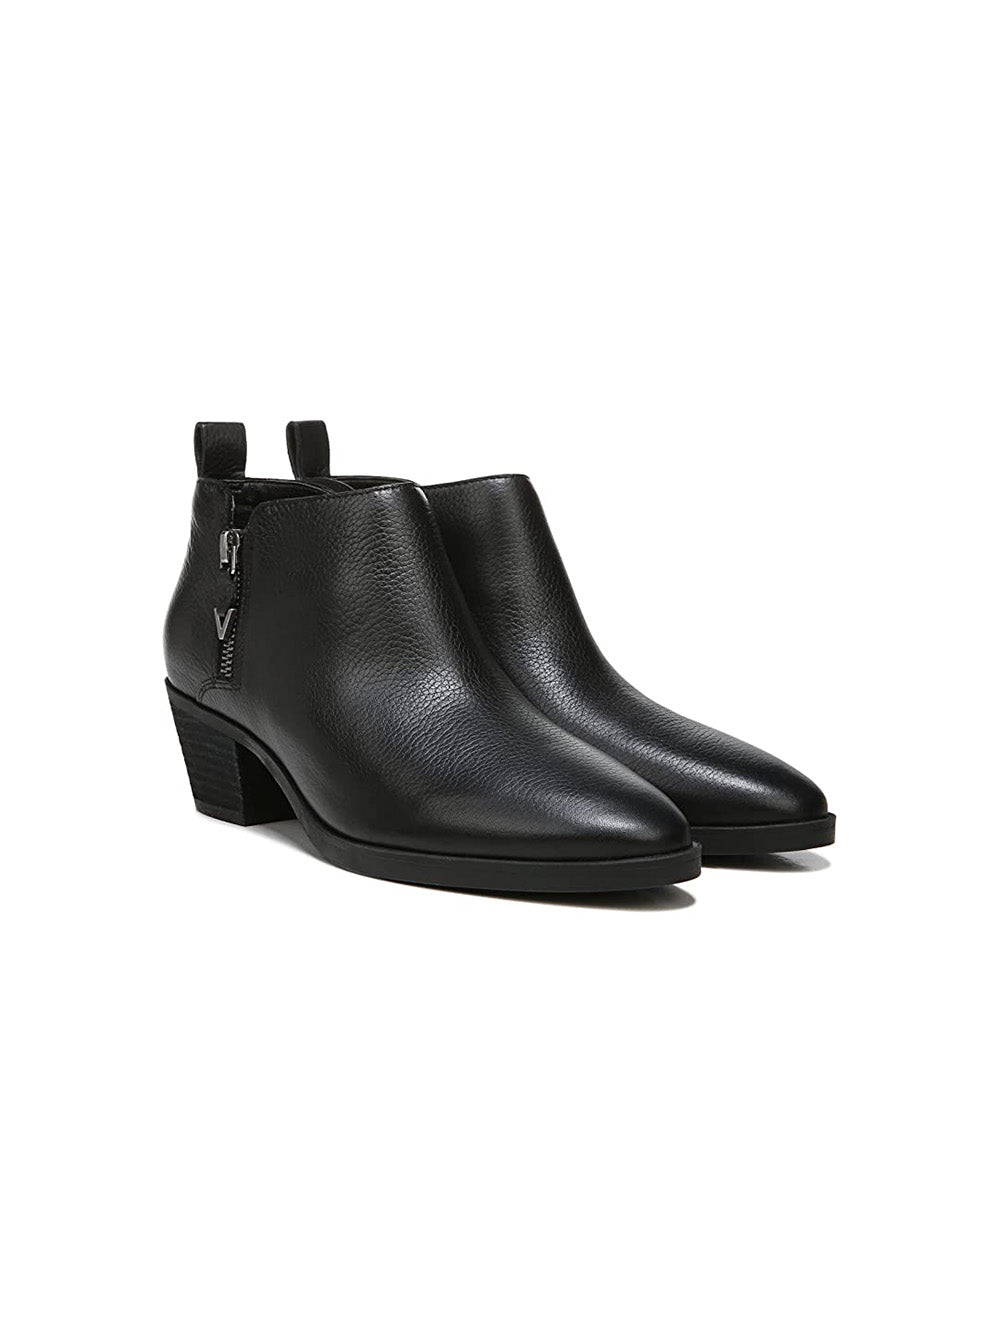 vionic cecily leather ankle boots in black